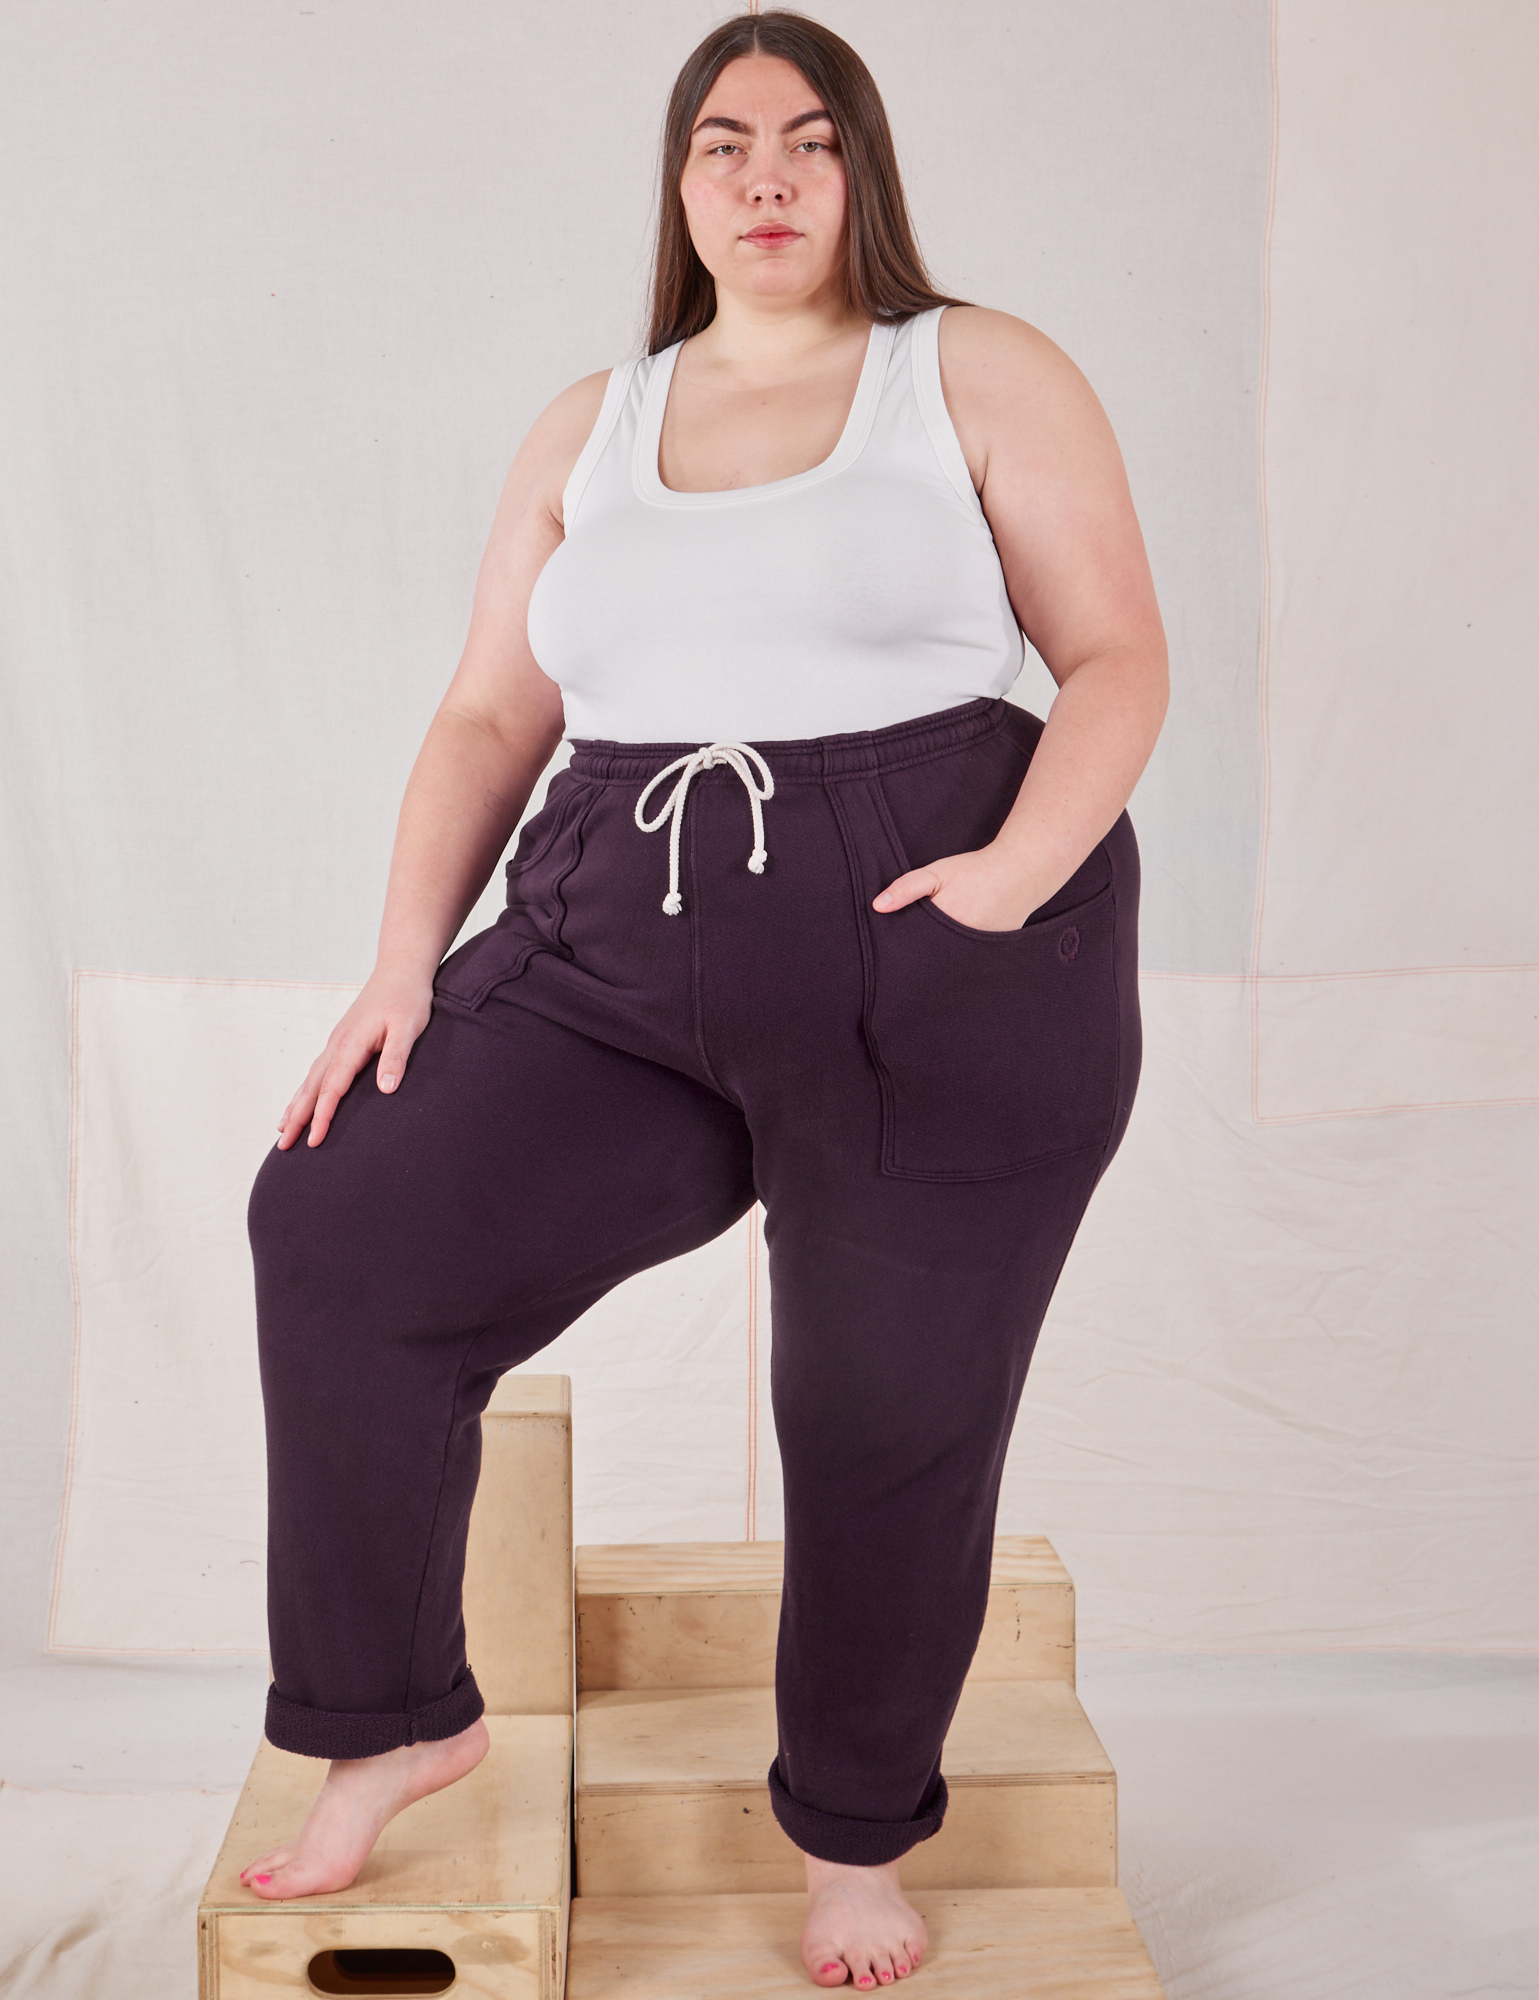 Marielena is 5&#39;8&quot; and wearing 1XL Rolled Cuff Sweat Pants in Nebula Purple paired with vintage off-white Cropped Tank